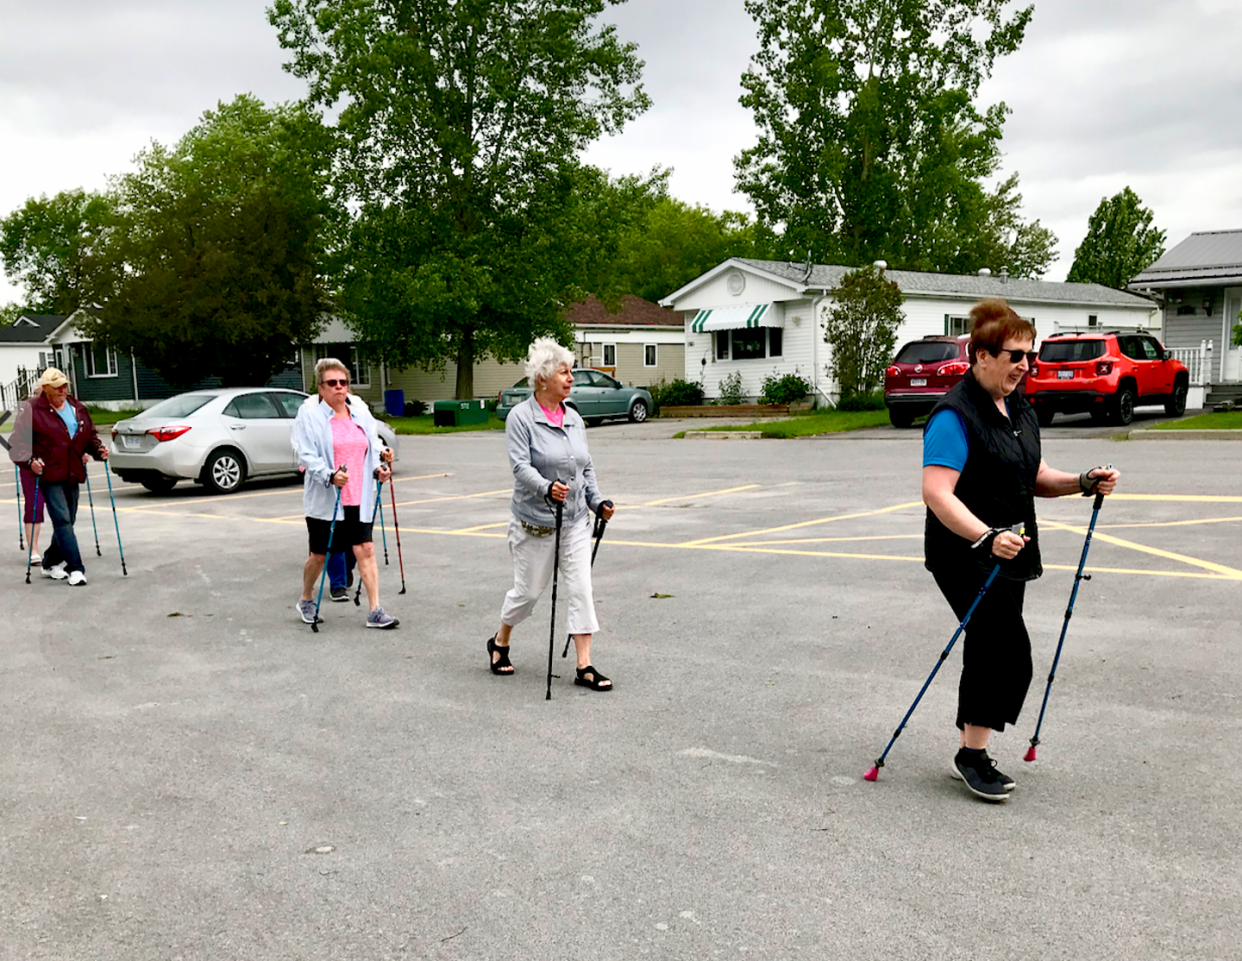 <span class="caption">Members of the Oasis Senior Supportive Living Program pole walking in their community.</span>